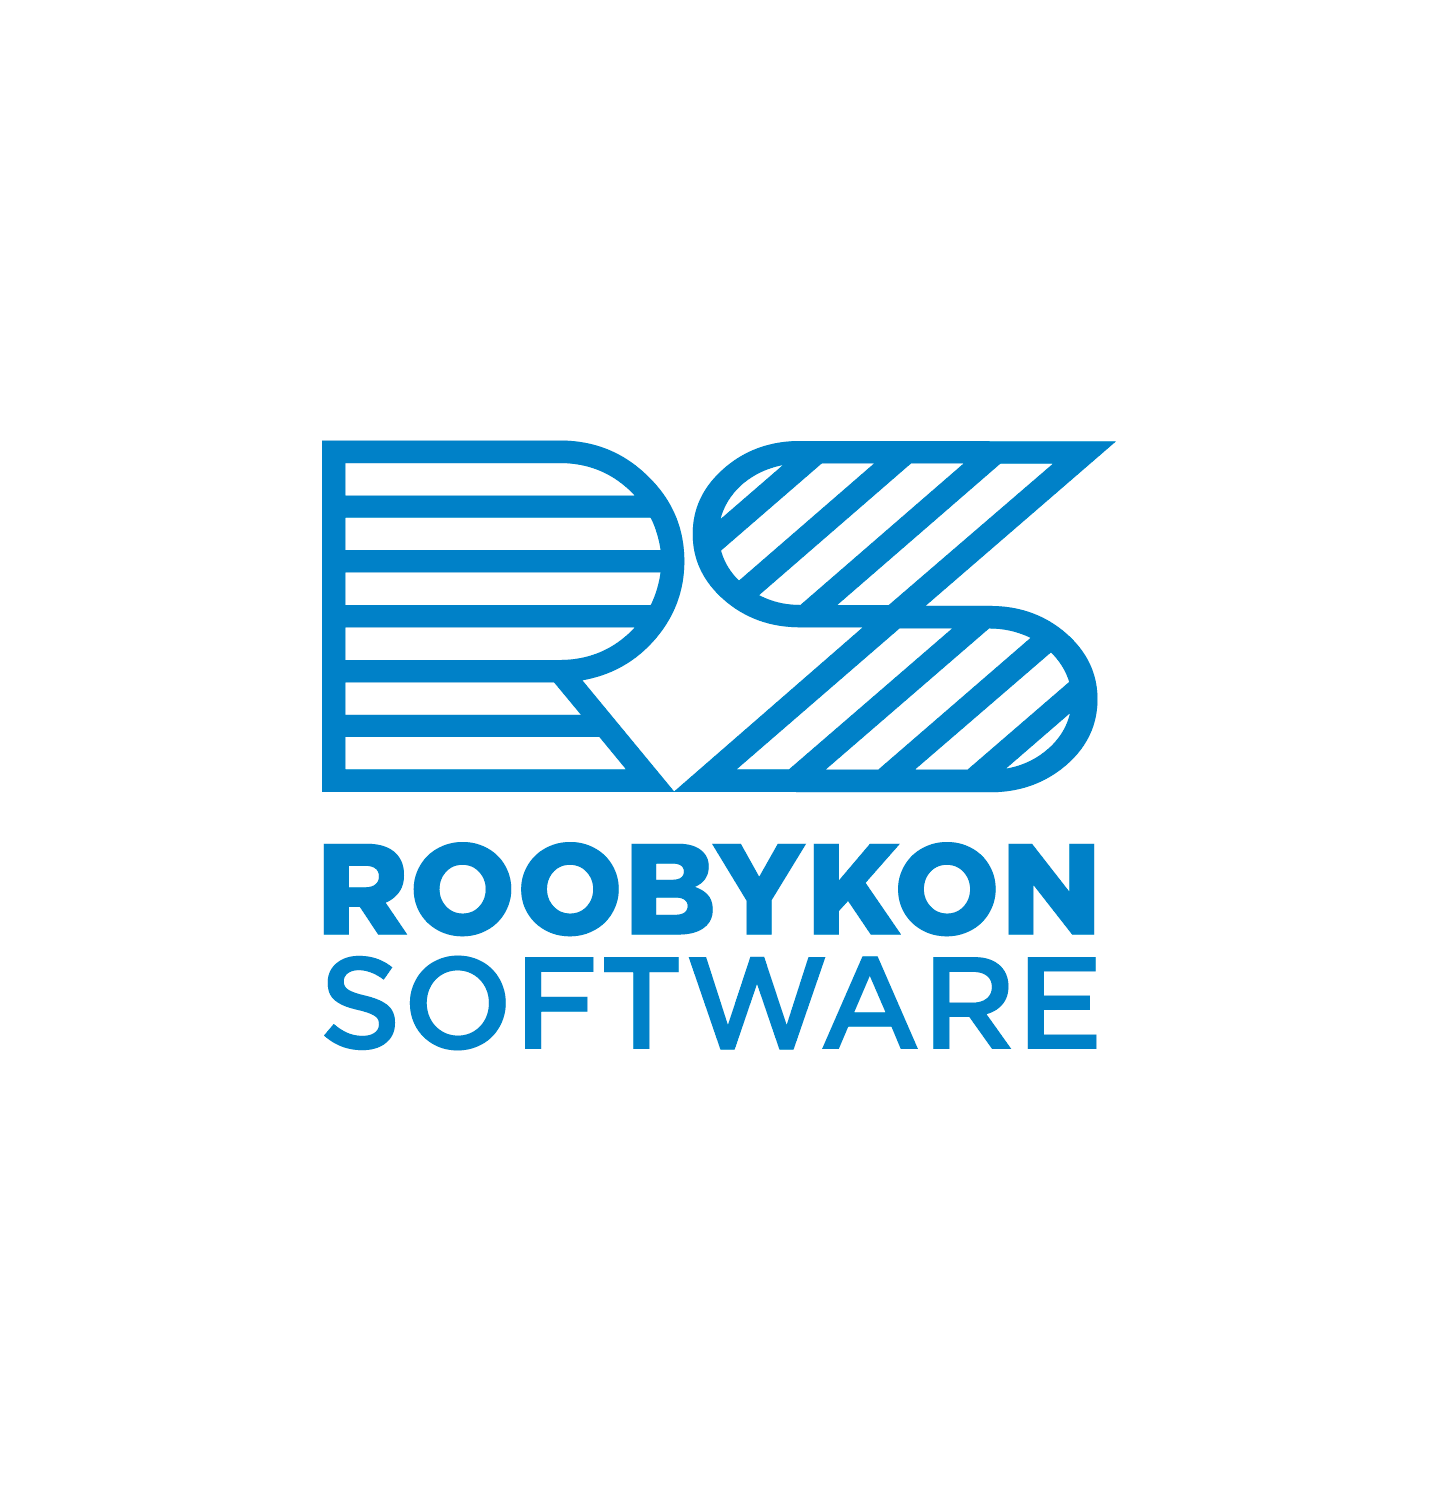 Roobykon Software profile on Qualified.One